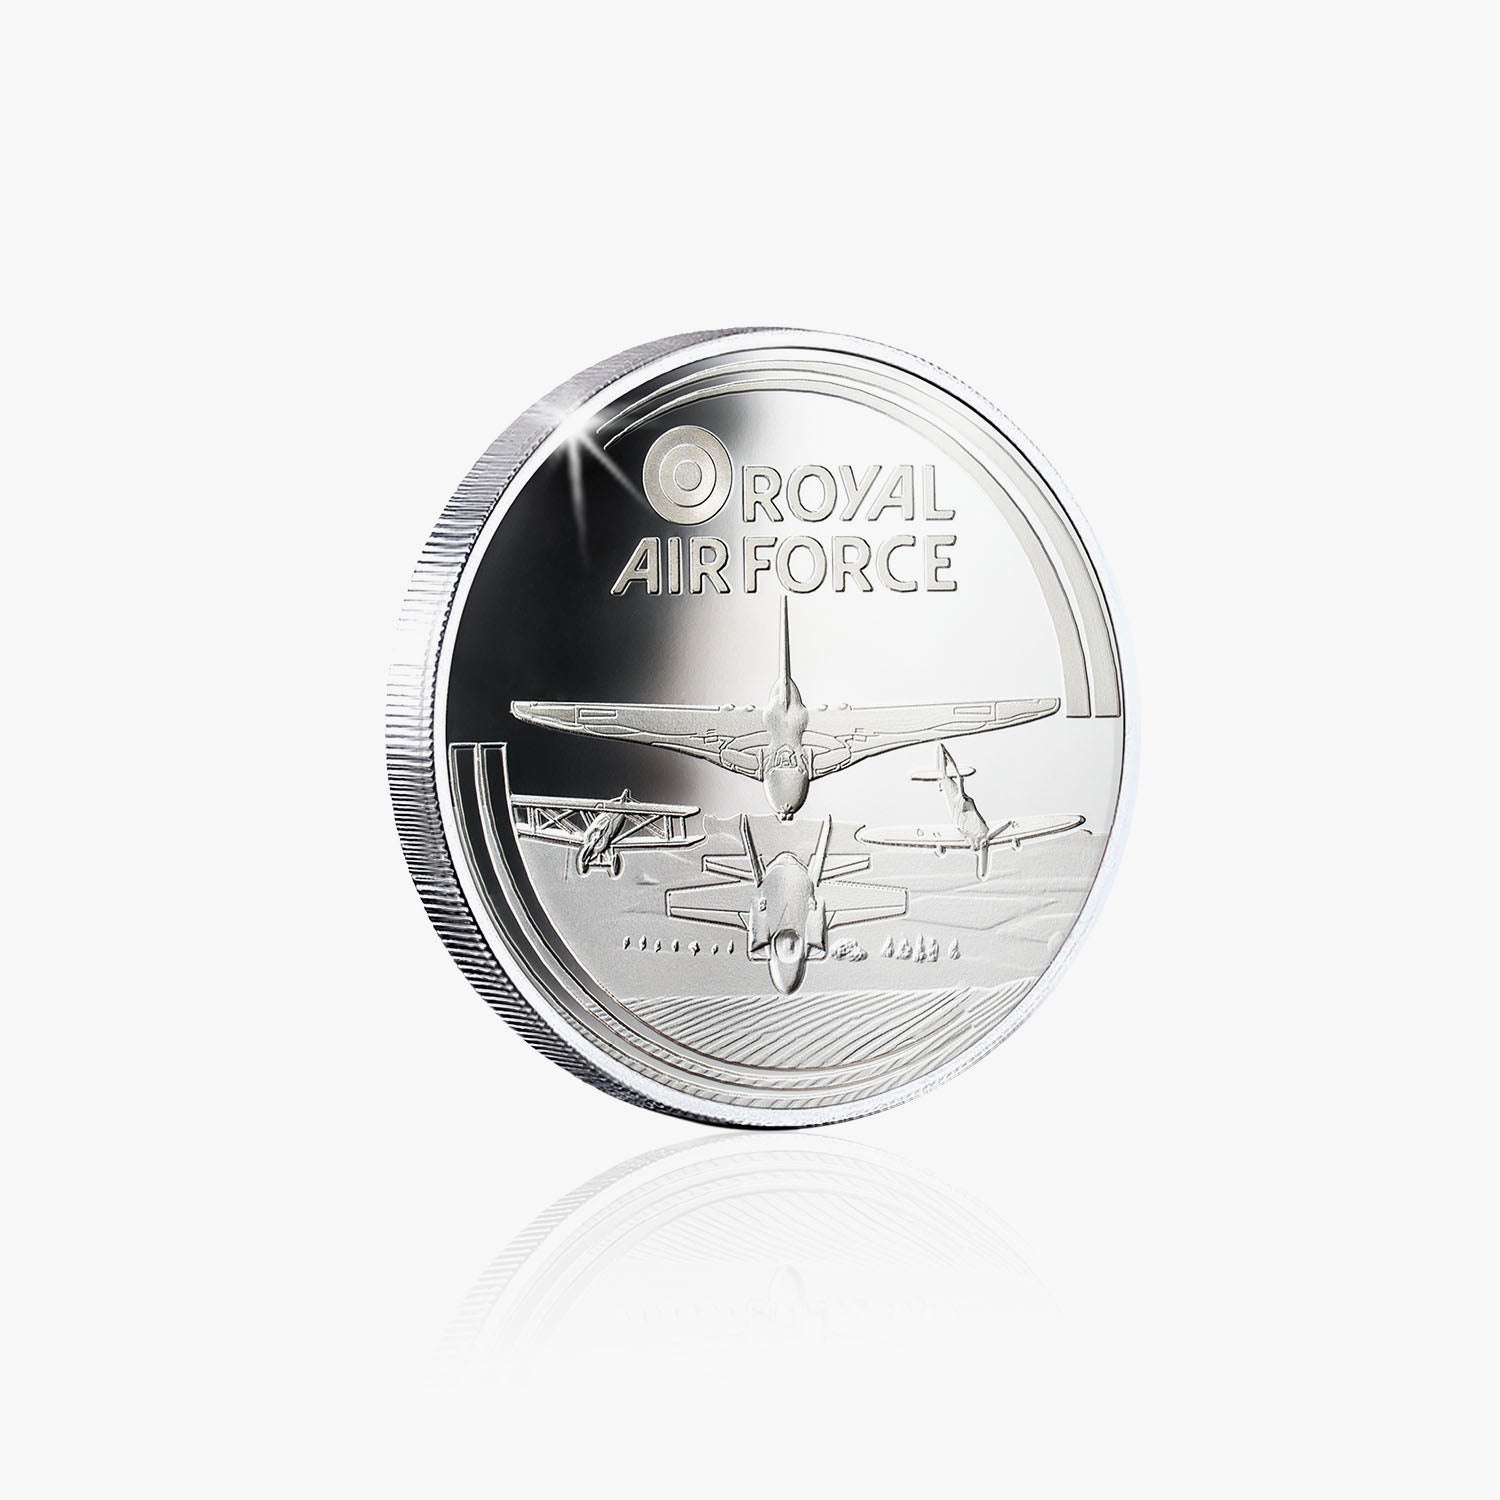 Fully Loaded Silver-Plated Commemorative